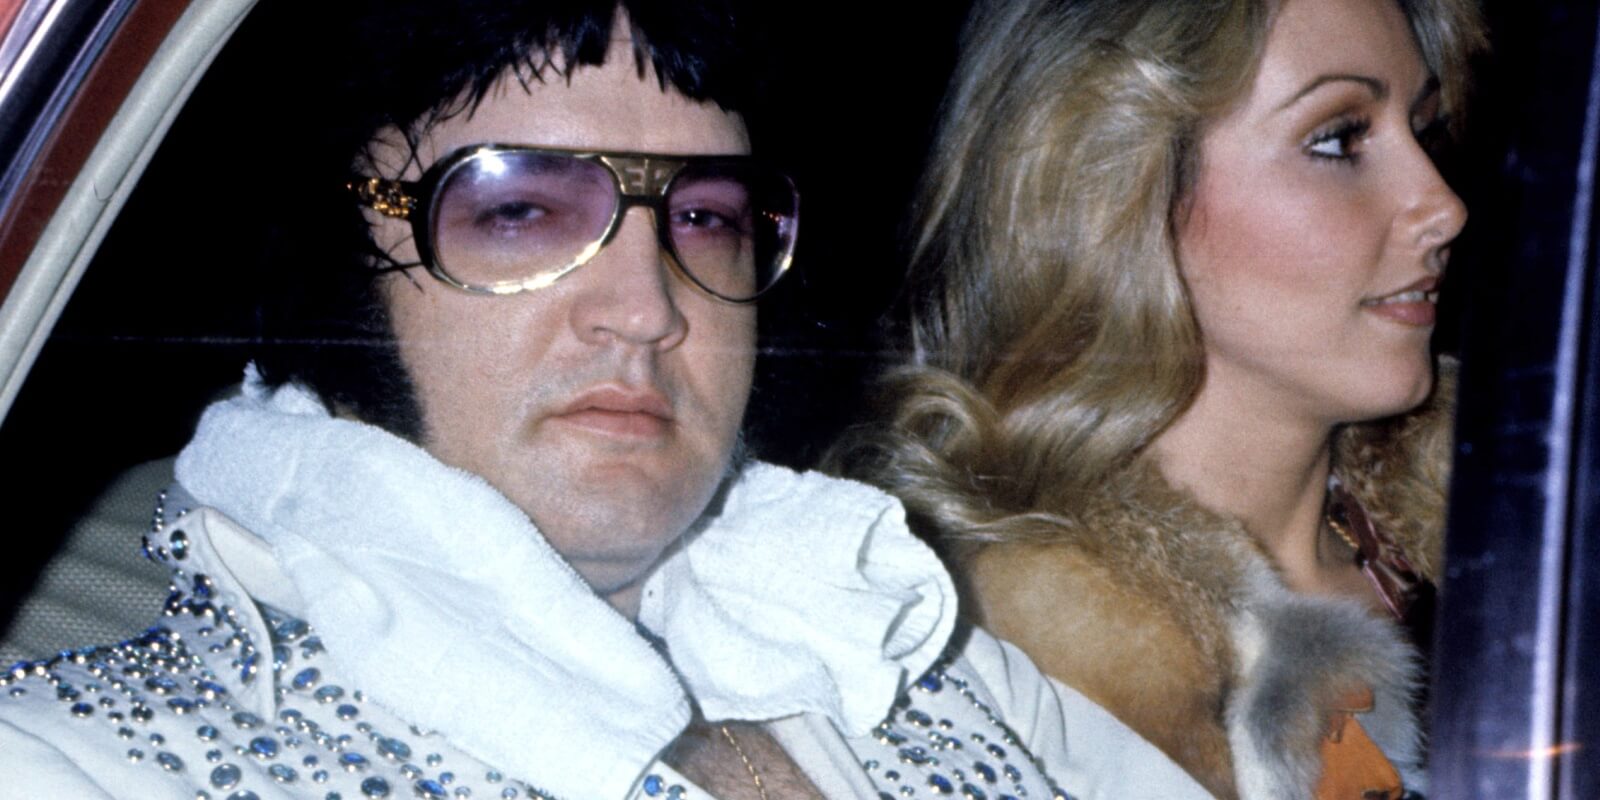 Elvis Presley and Linda Thompson photographed in 1976.